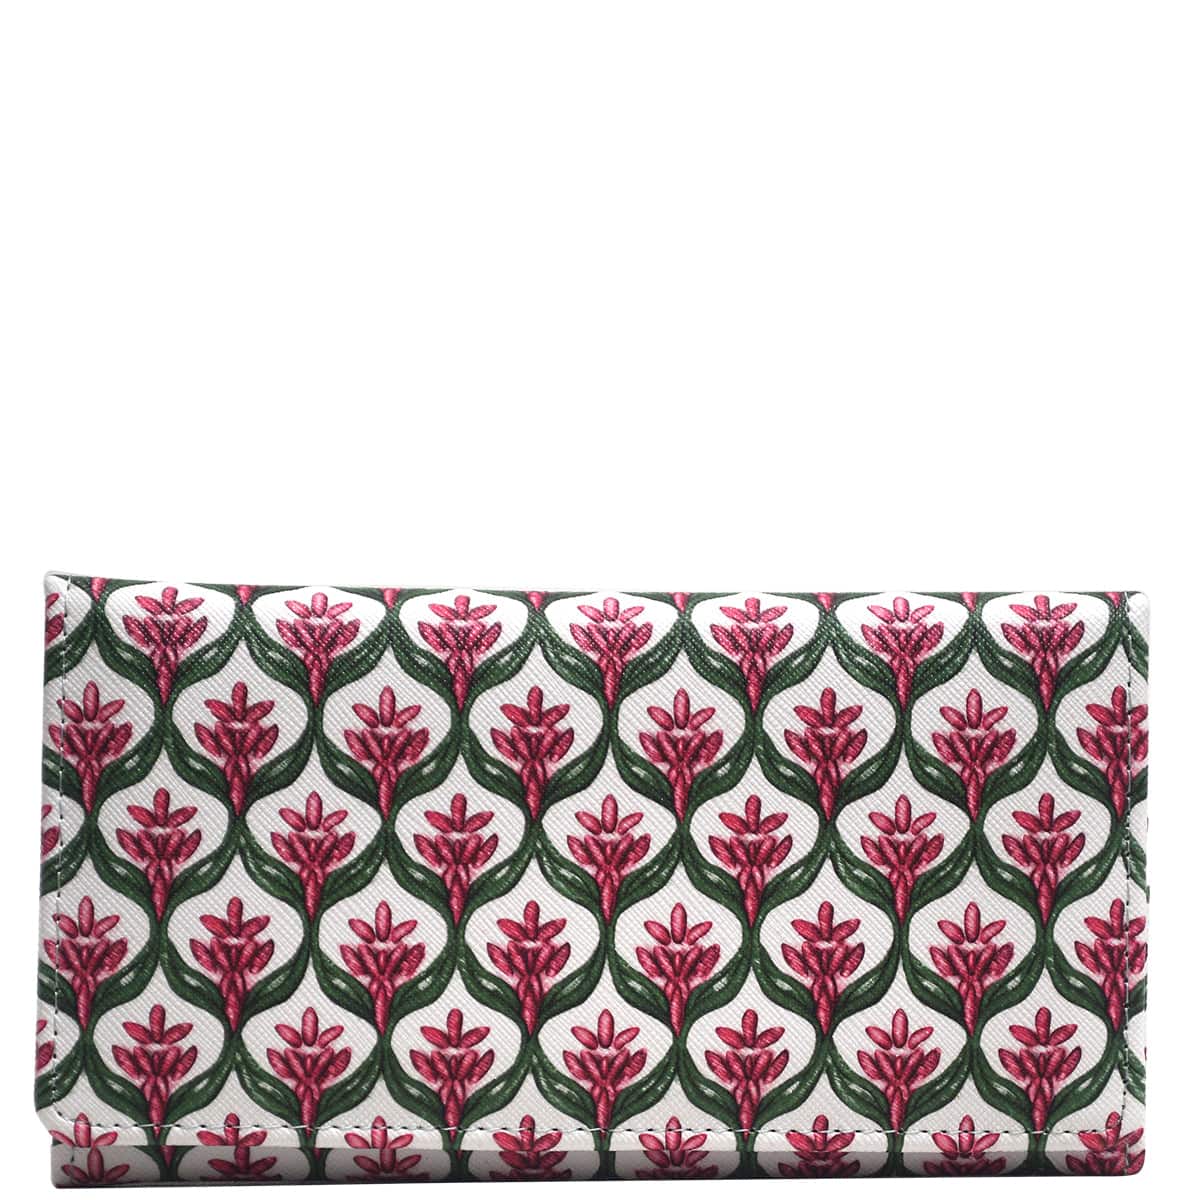 Wider Window Wallet - French Chateau Green Pink